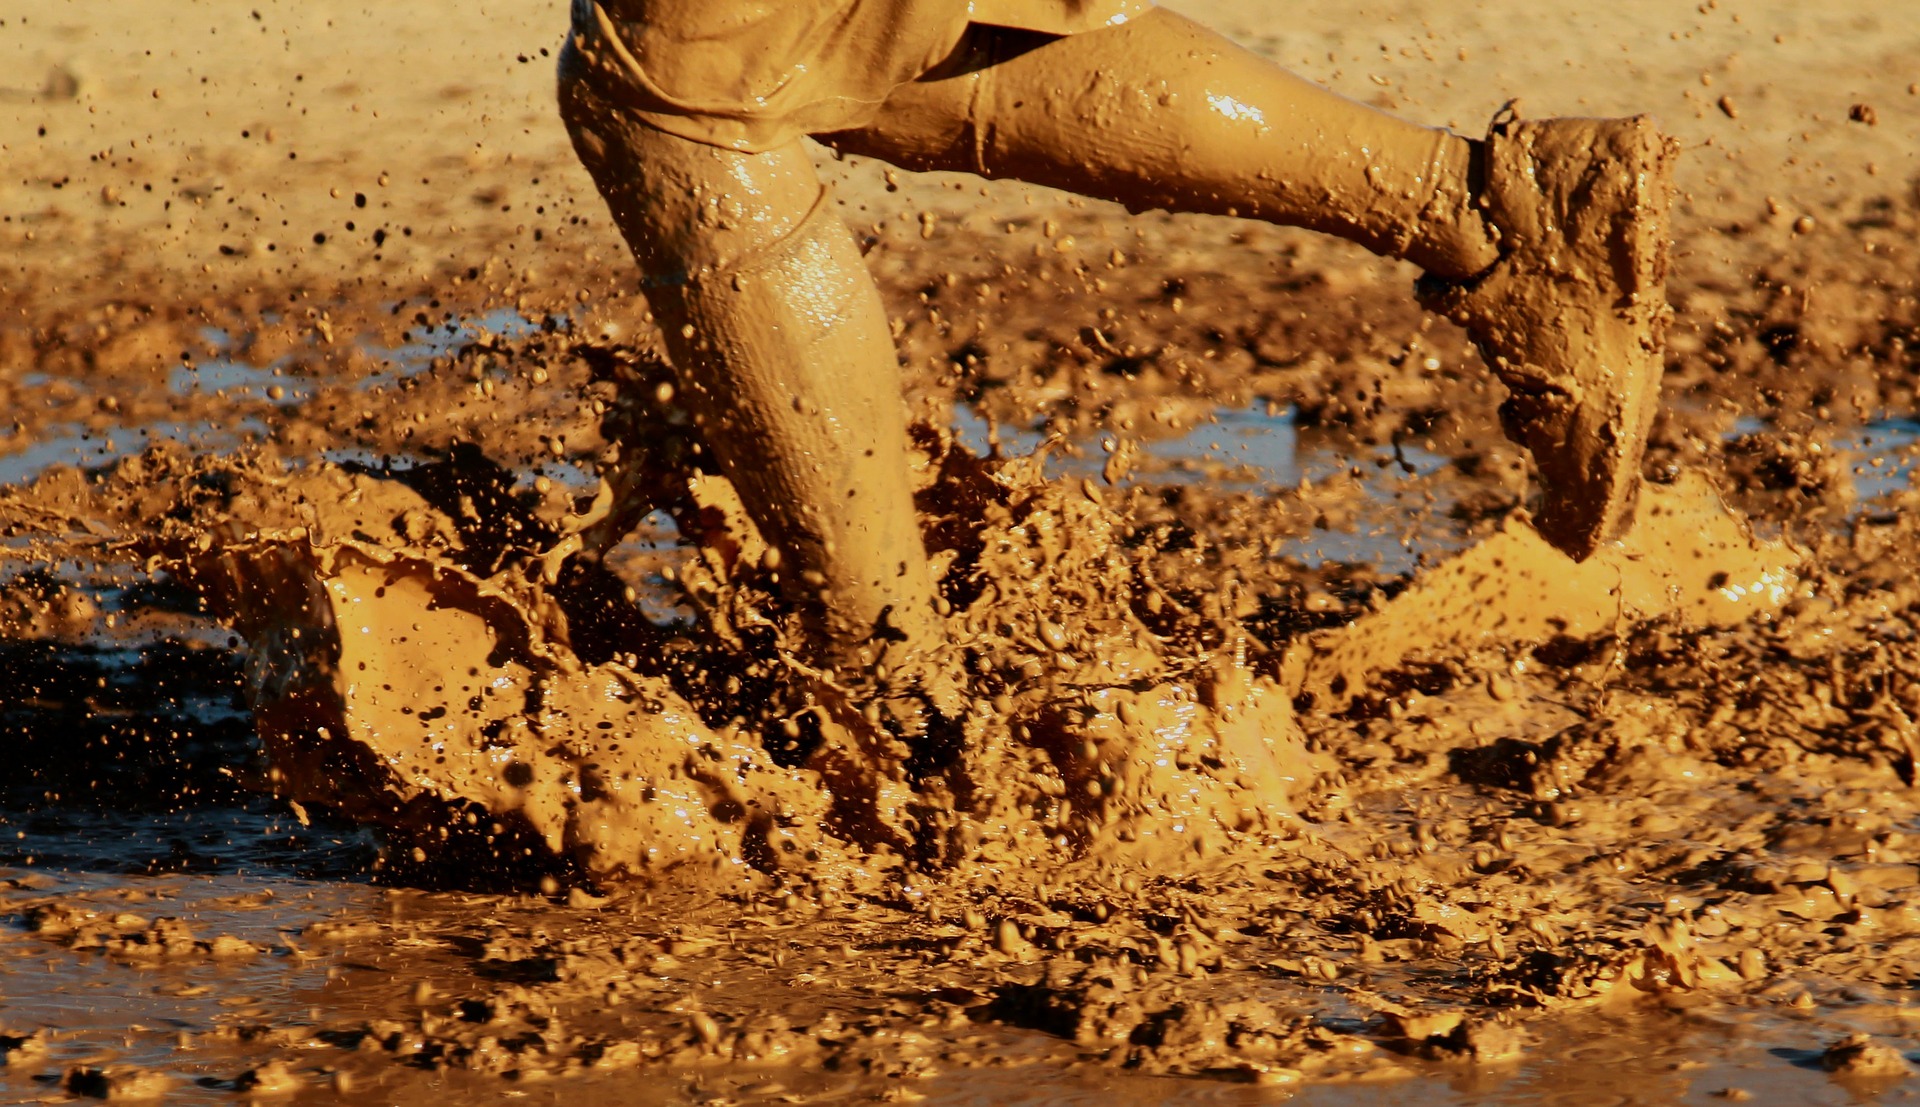 The ULTIMATE Tough Mudder training guide